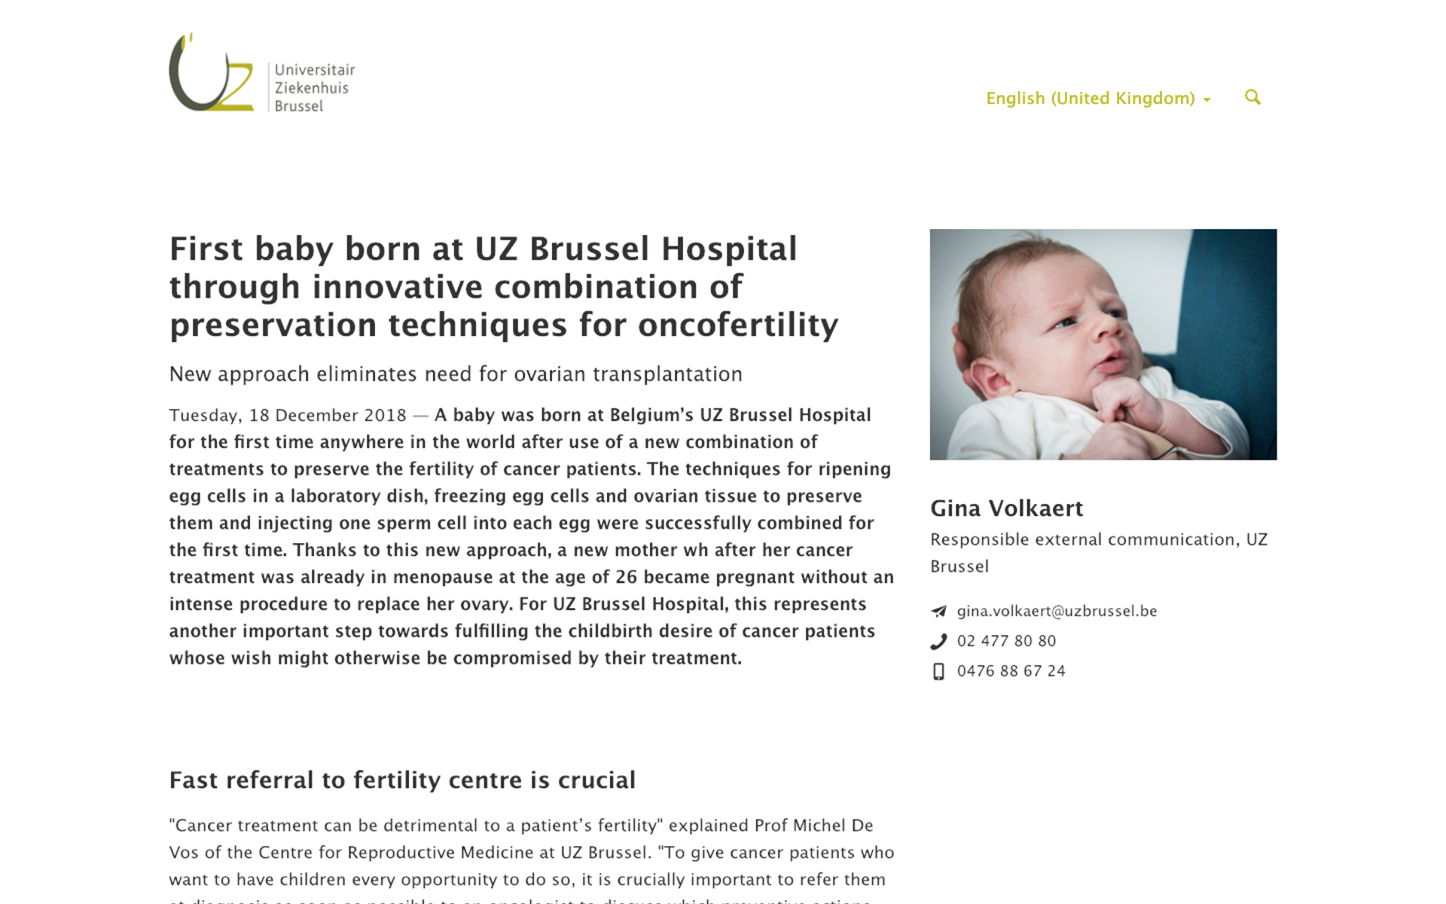 First baby born at UZ Brussel Hospital through innovative combination of preservation techniques for oncofertility